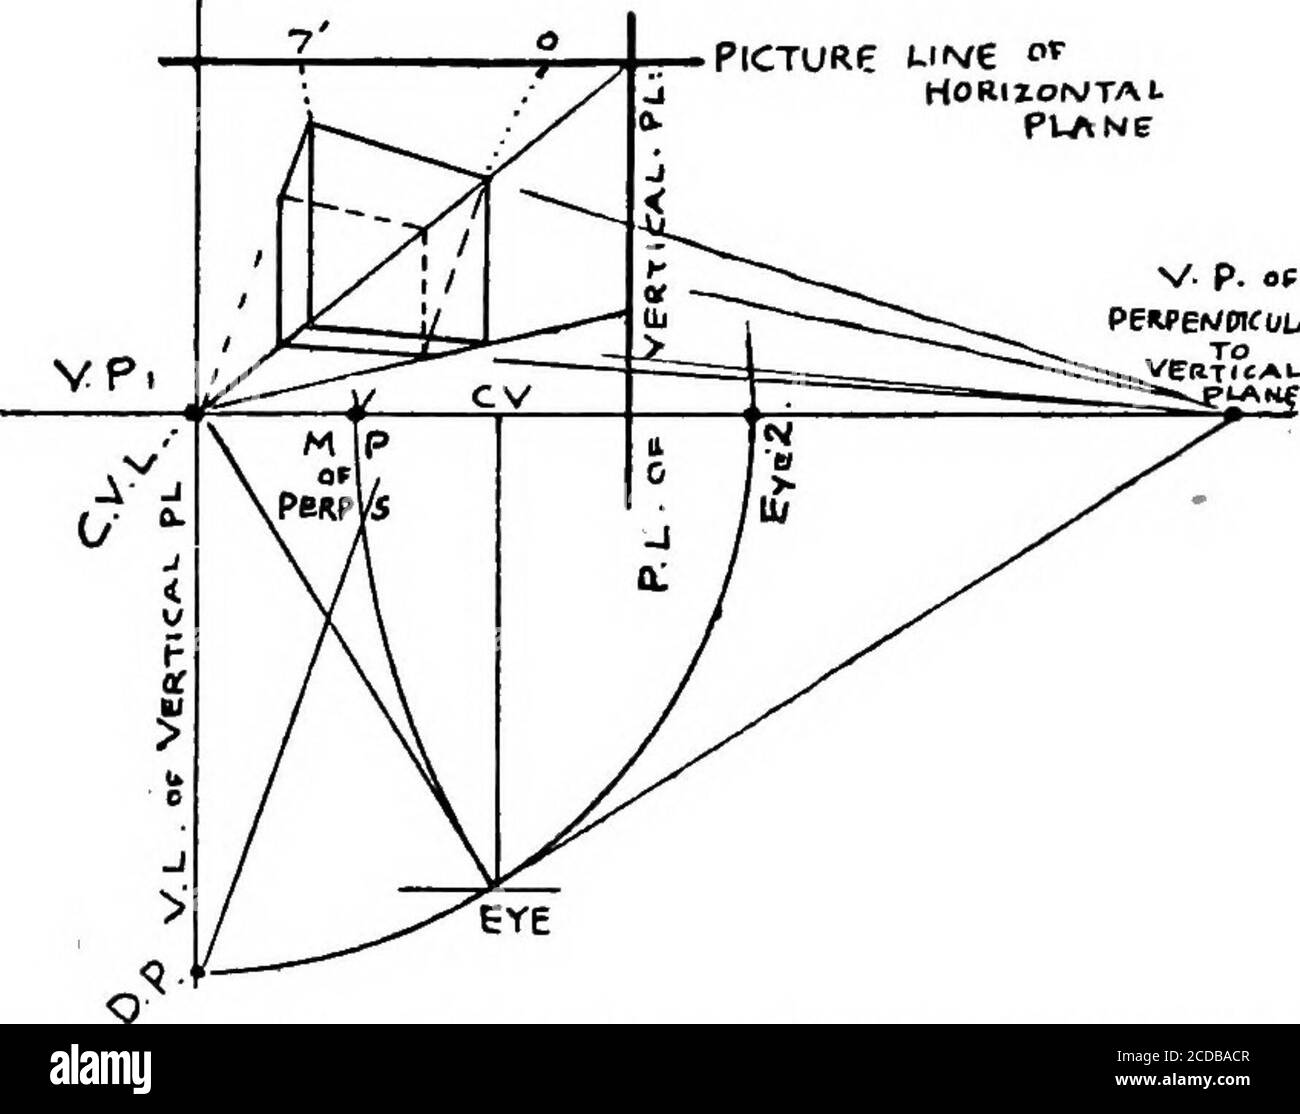 Perspective For Art Students Necessaryfor Obtaining A Perpendicular To An Oblique Plane Butare All The V L S And P L S Which Belong To A Rectangularobject With Base In An Oblique Plane Slanting